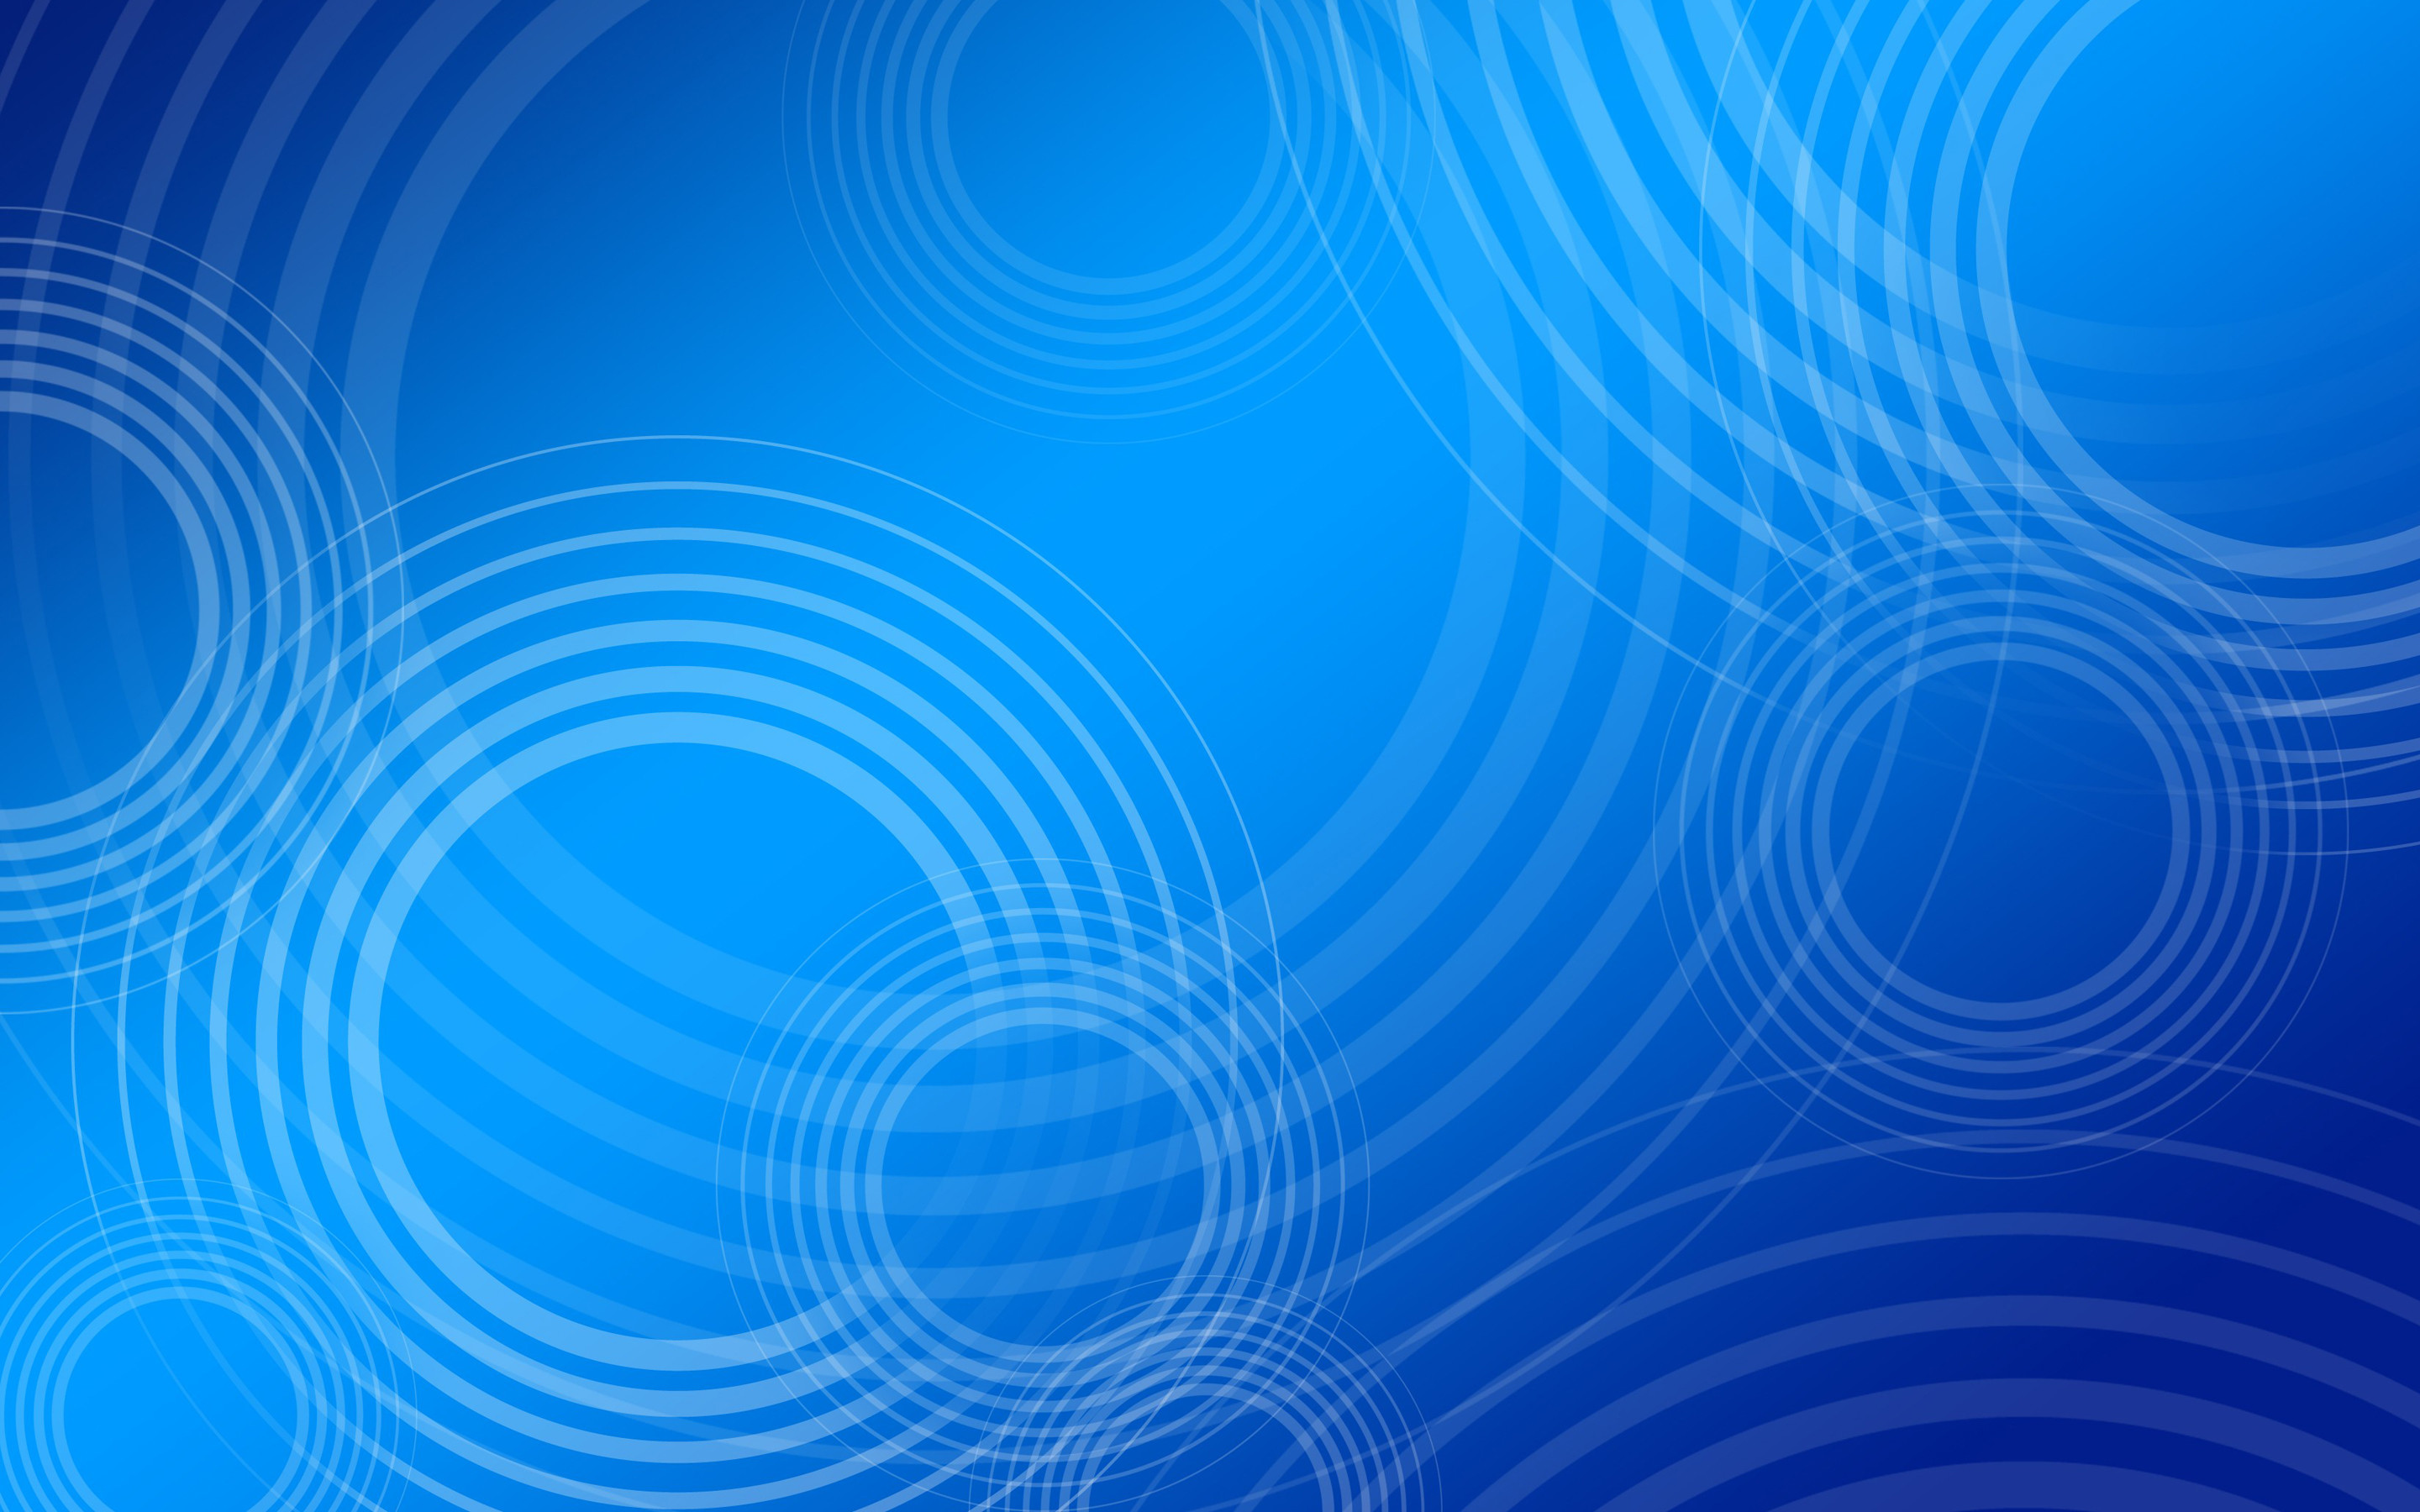 2880x1800 abstract circular blue wallpaper hd wallpapers hd desktop wallpapers  amazing hd download apple background wallpapers windows colourfull lovely  wallpapers ...